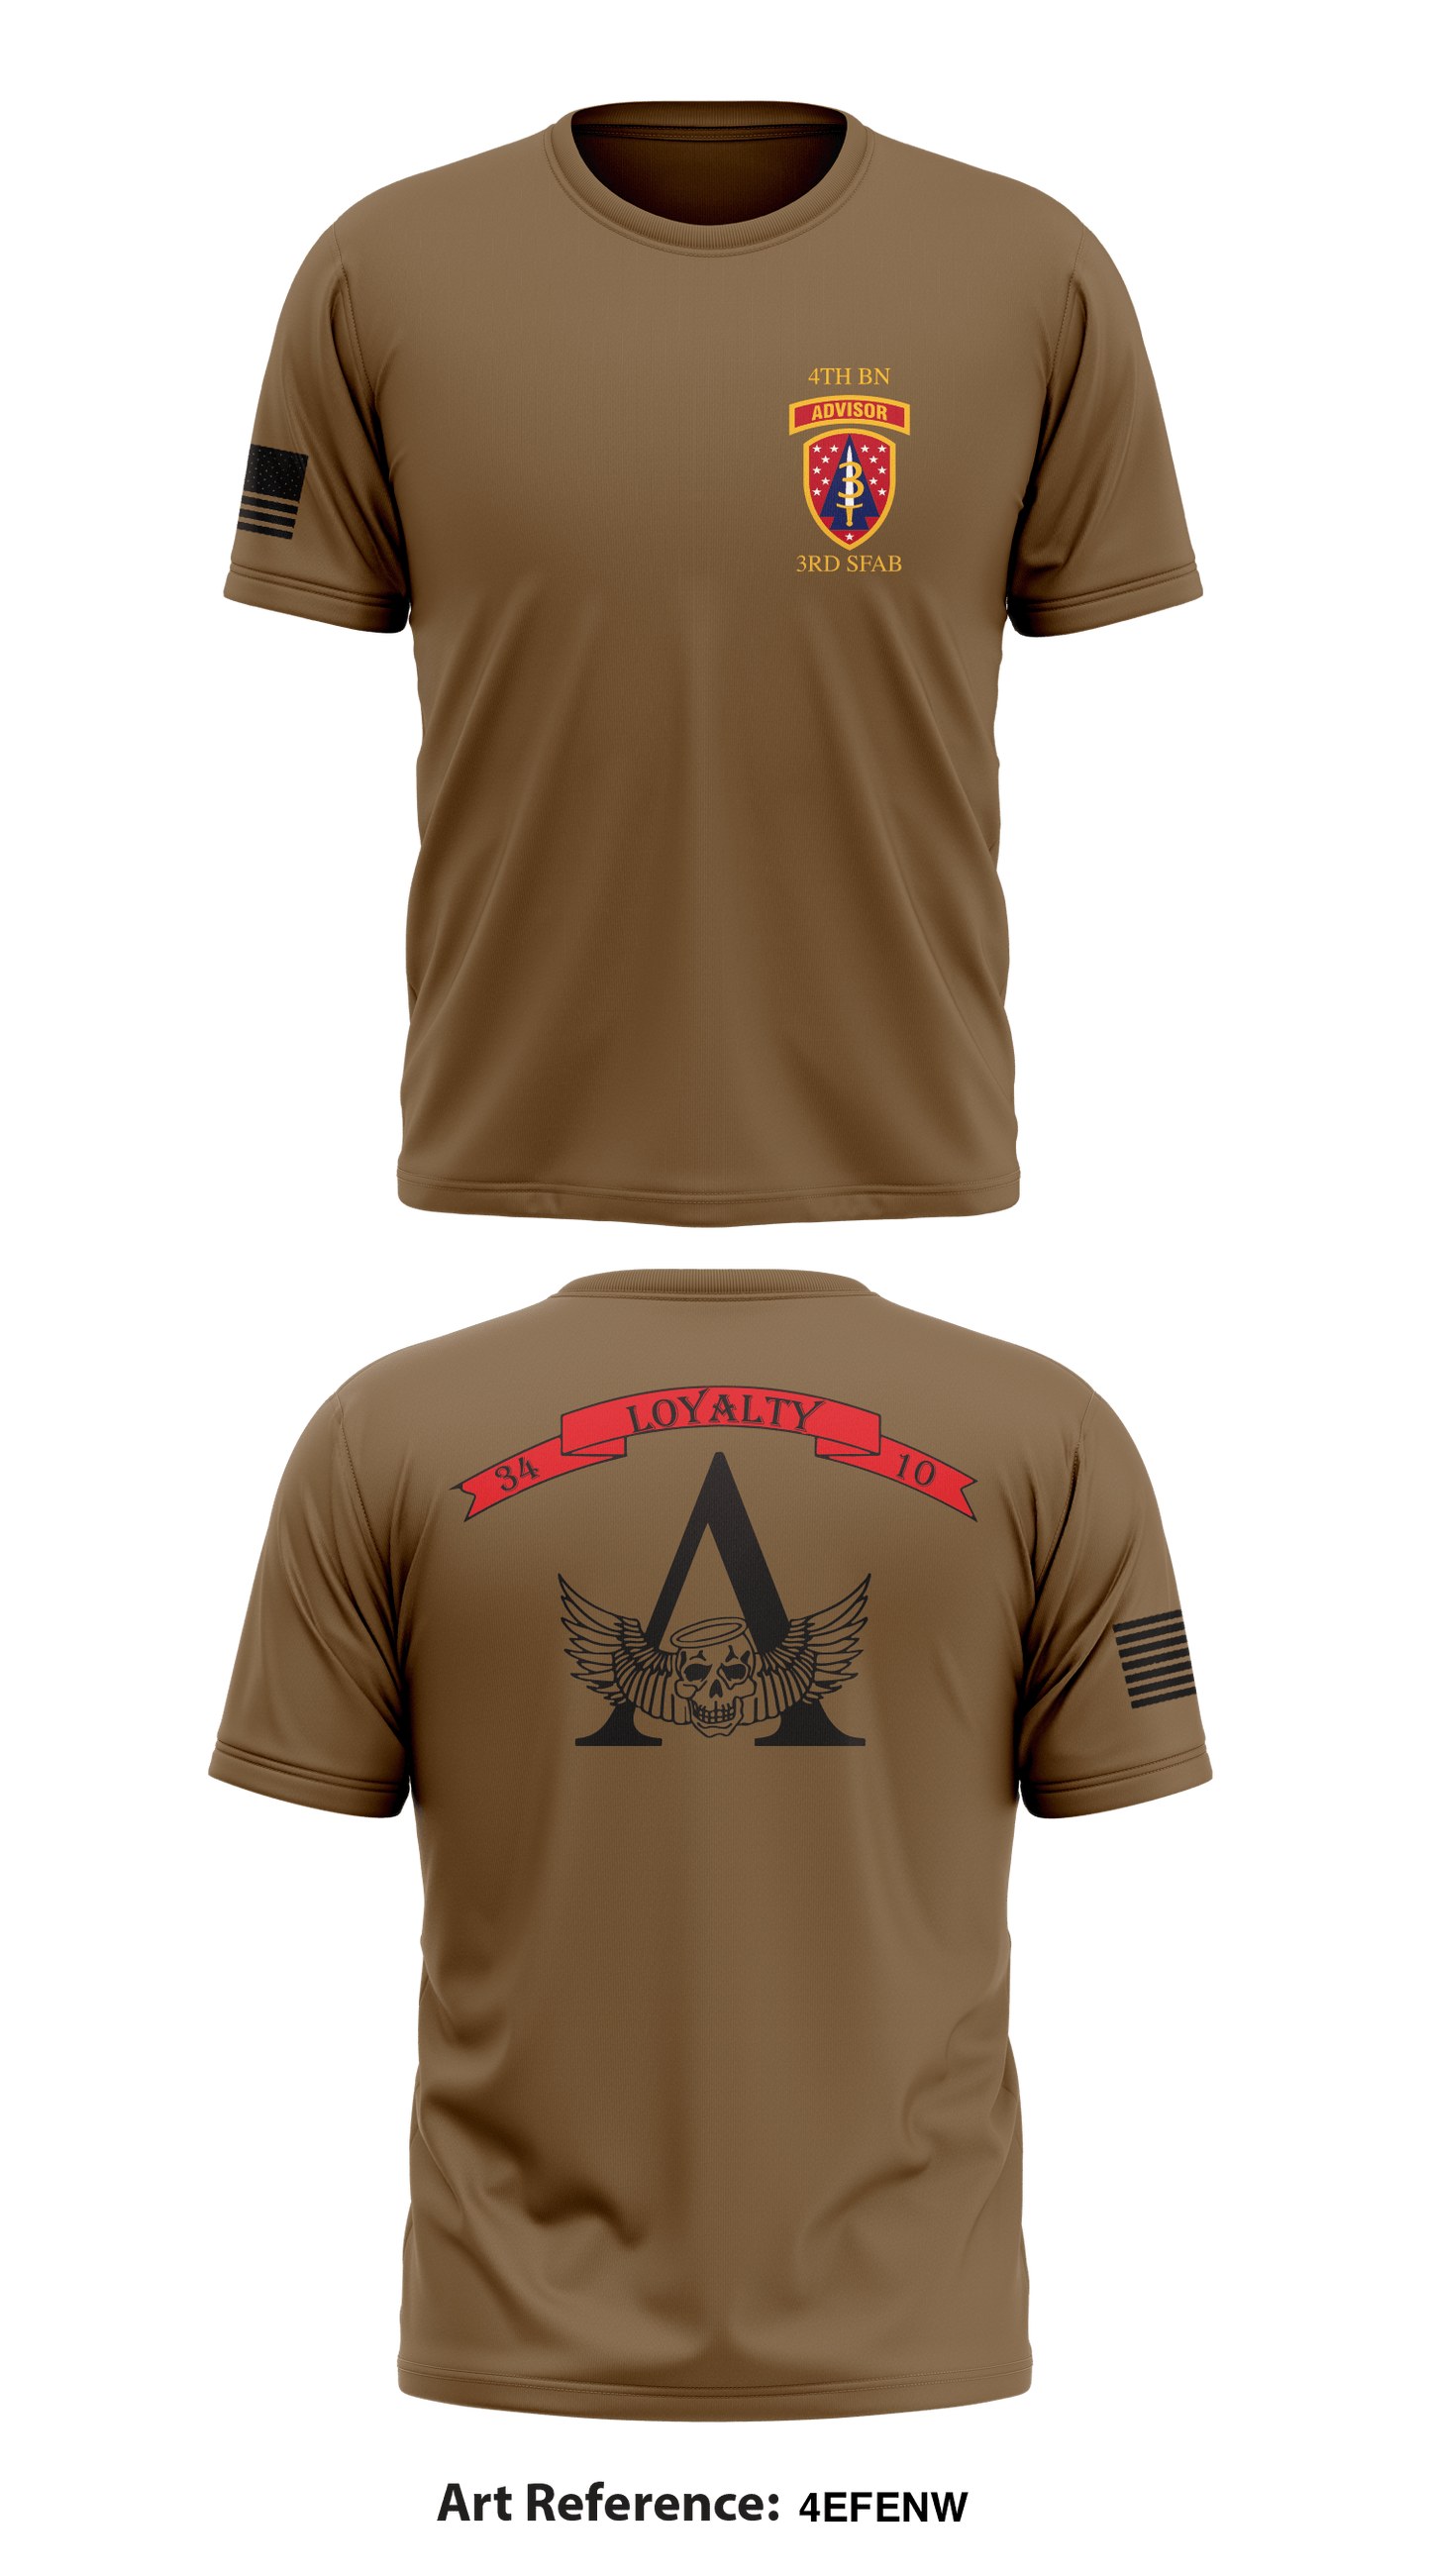 Alpha Battery, 4th BN, 3SFAB Team 3410 Store 1 Core Men's SS Performance Tee - 4EfENW